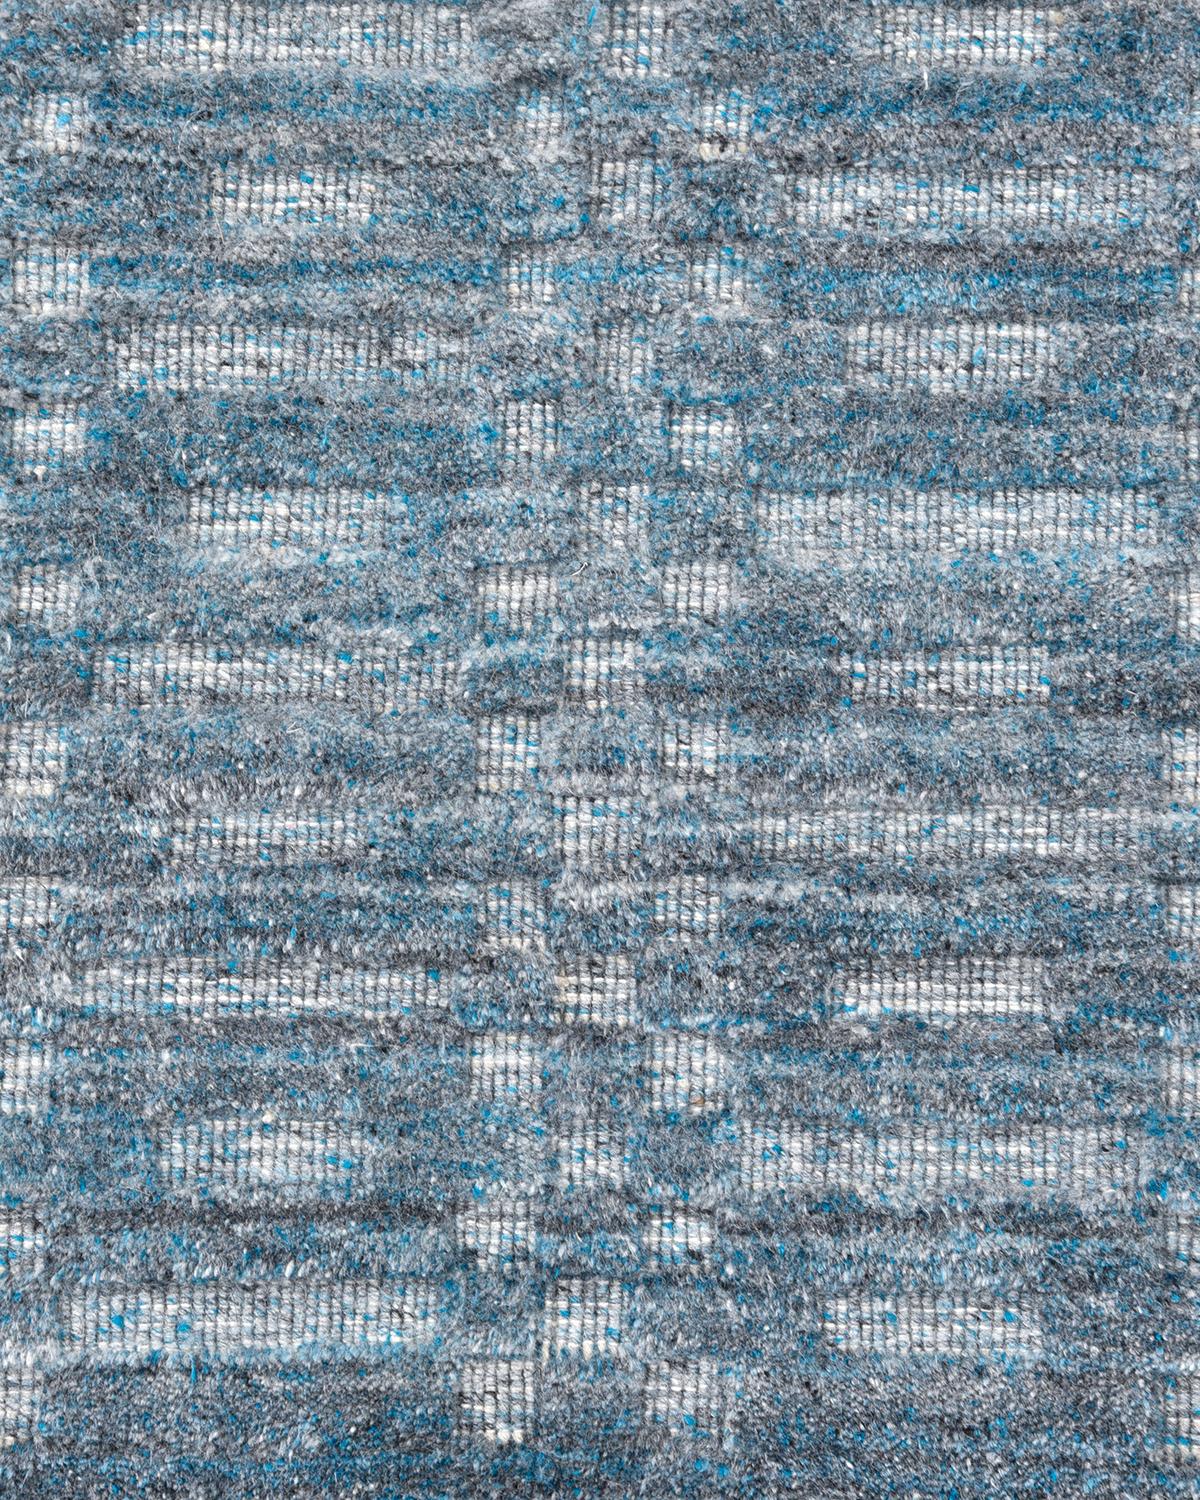 Solo Rugs Modern Solid Hand Loomed Blue Area Rug (Indisch) im Angebot